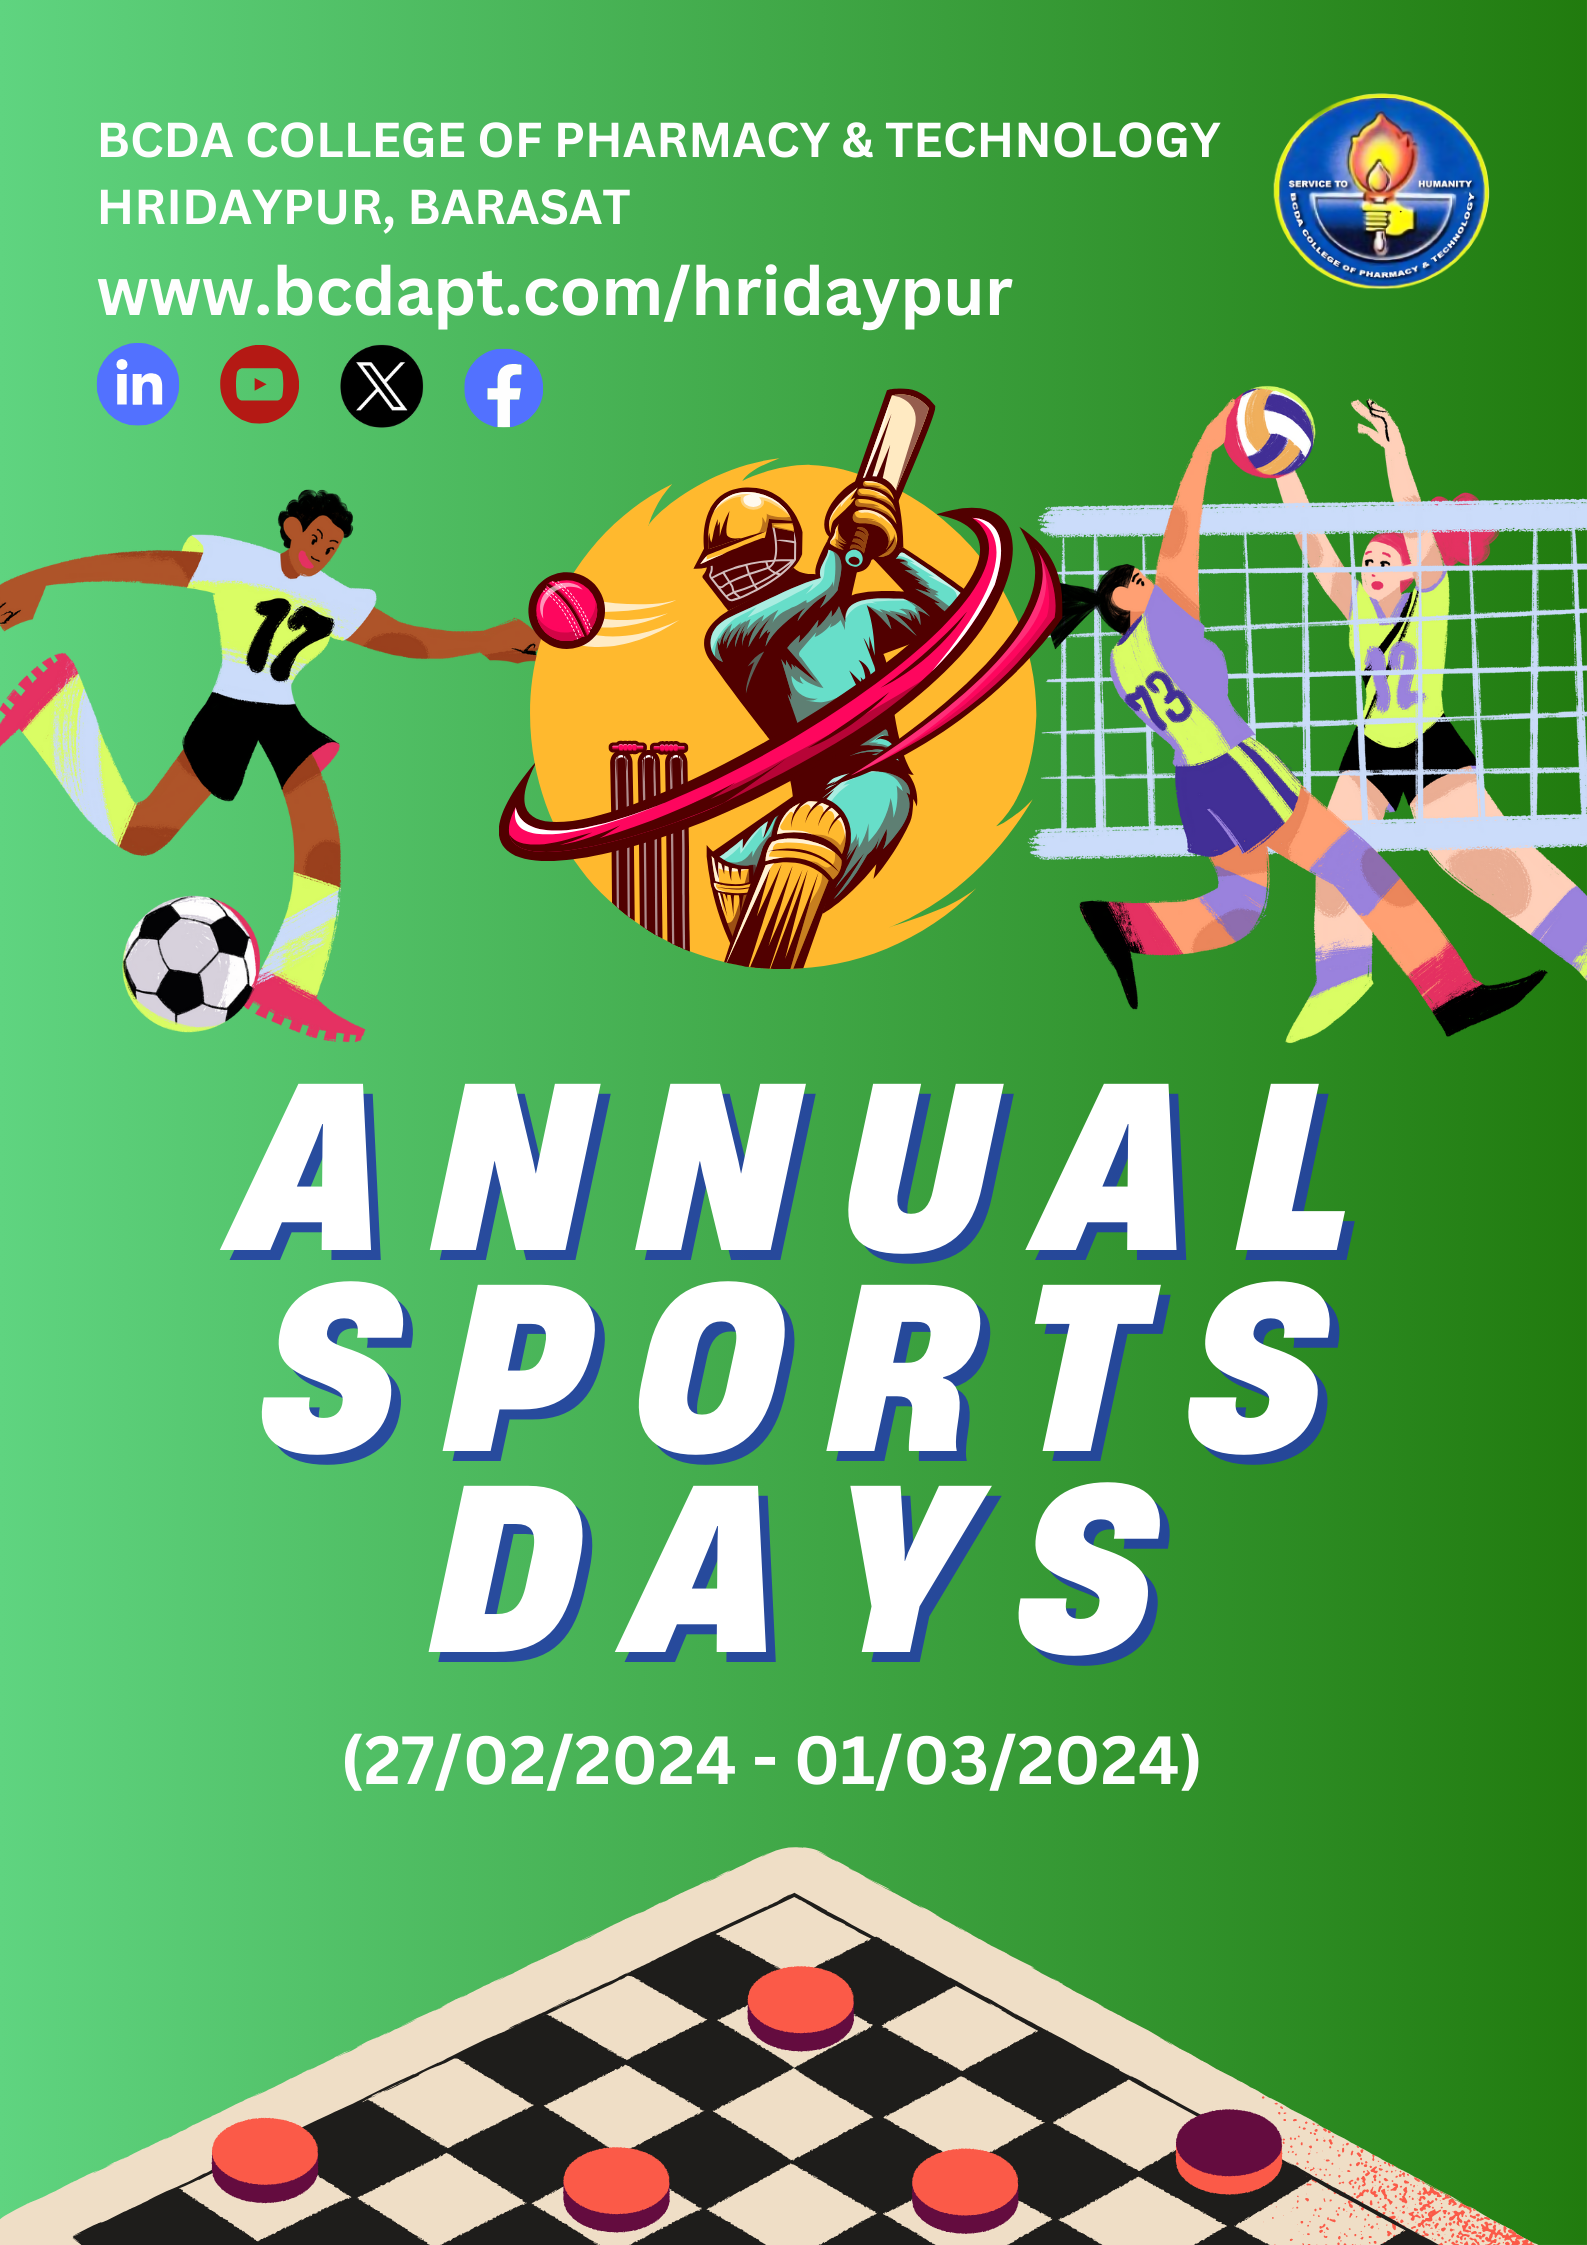 College sports days (27/02/2024 to 01/03/2024)